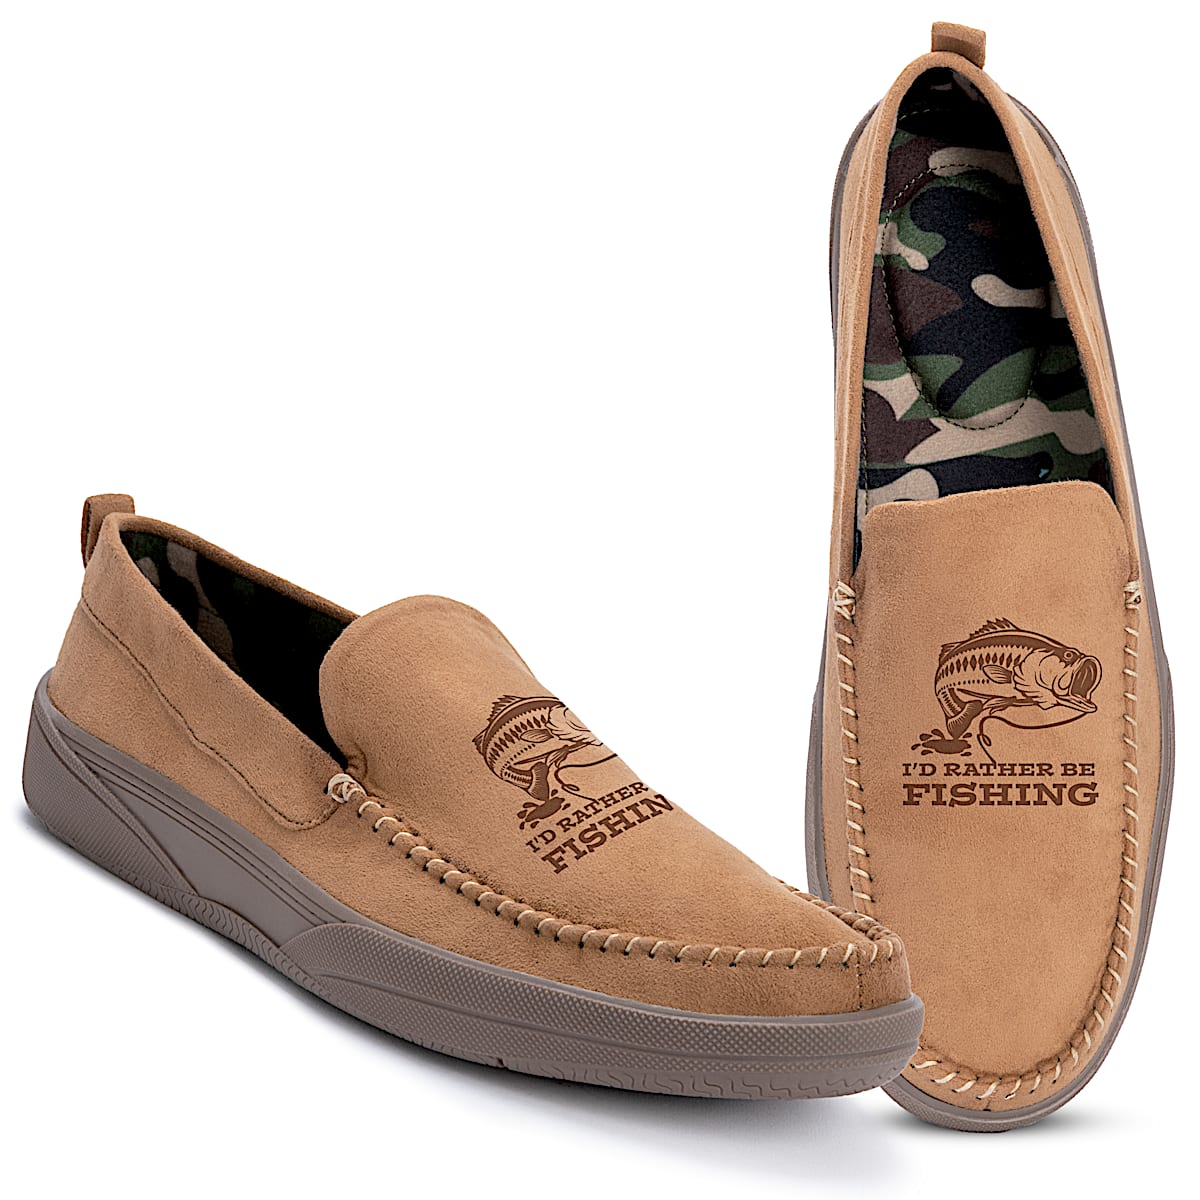 Id Rather Be Fishing Mens Tan-Color Faux Suede Slip-On Shoes Featuring An  Embossed Image Of Fishing Art And Lined With Soft Flannel In A Camo Print